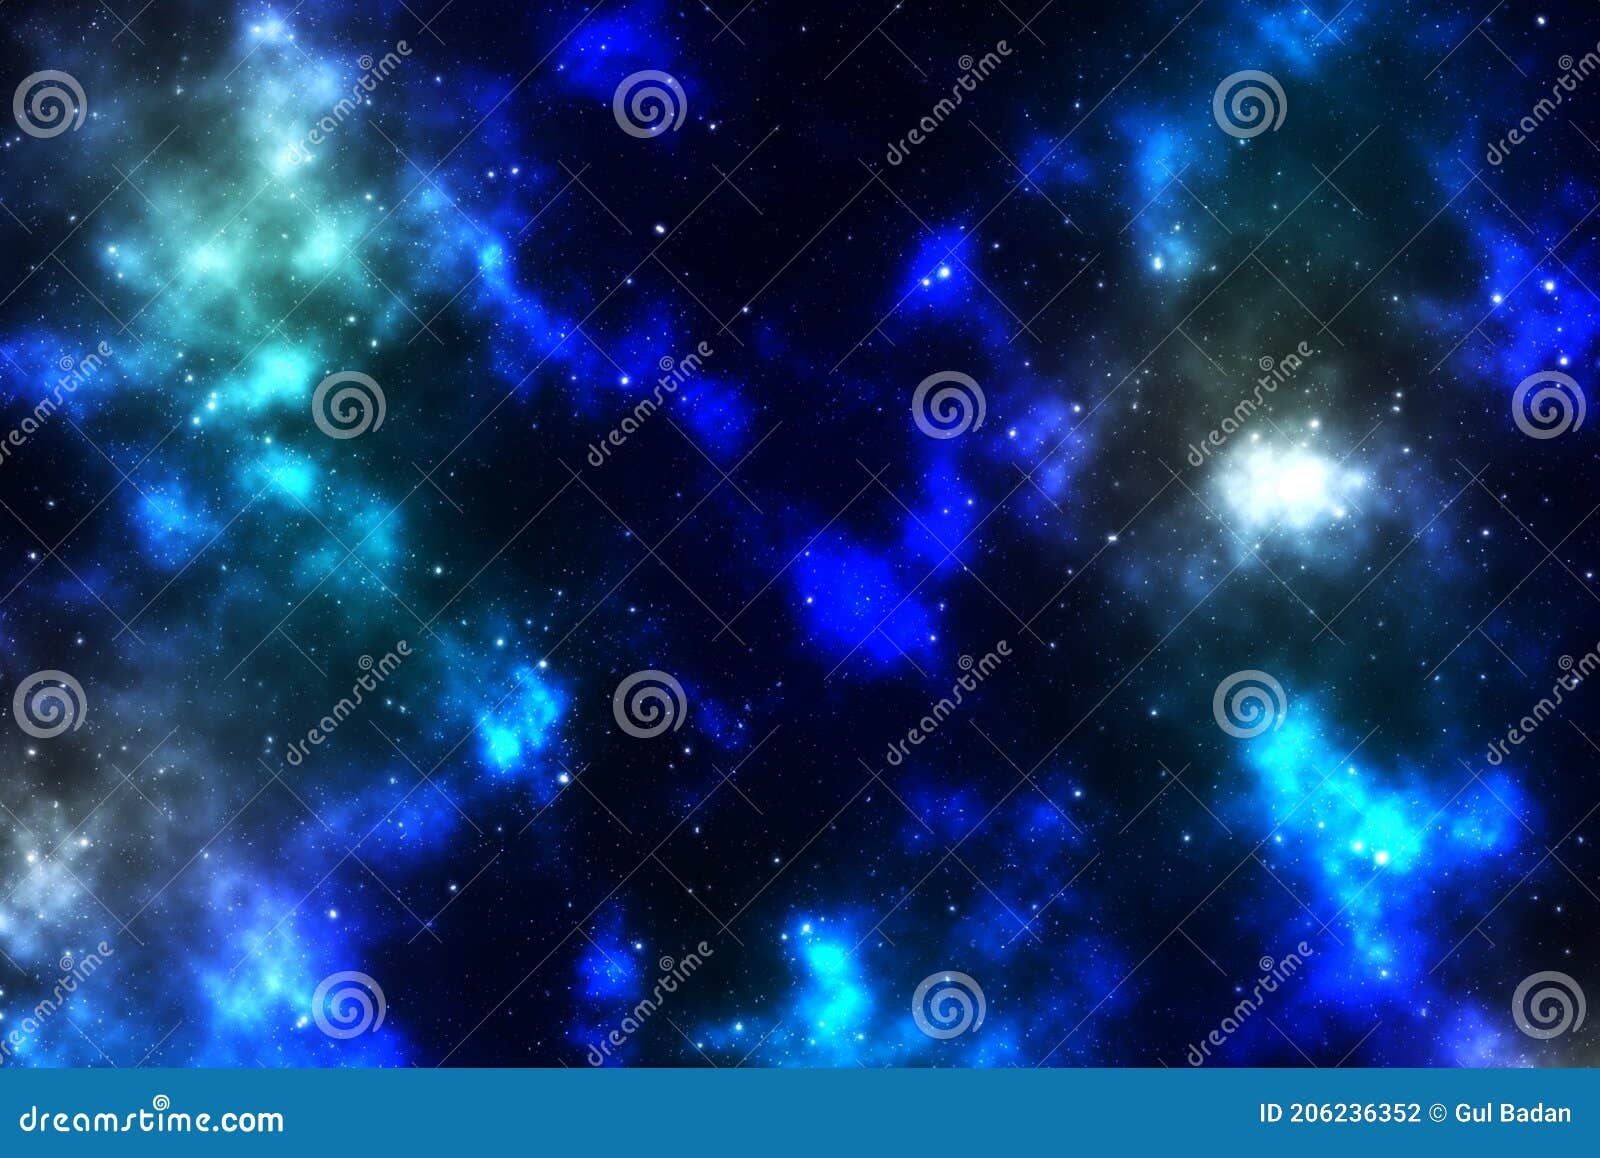 22 139 Blue Galaxy Wallpaper Photos Free Royalty Free Stock Photos From Dreamstime Here are 10 ideal and most recent galaxy wallpaper 1920x1080 hd for desktop with full hd 1080p (1920 × 1080). dreamstime com